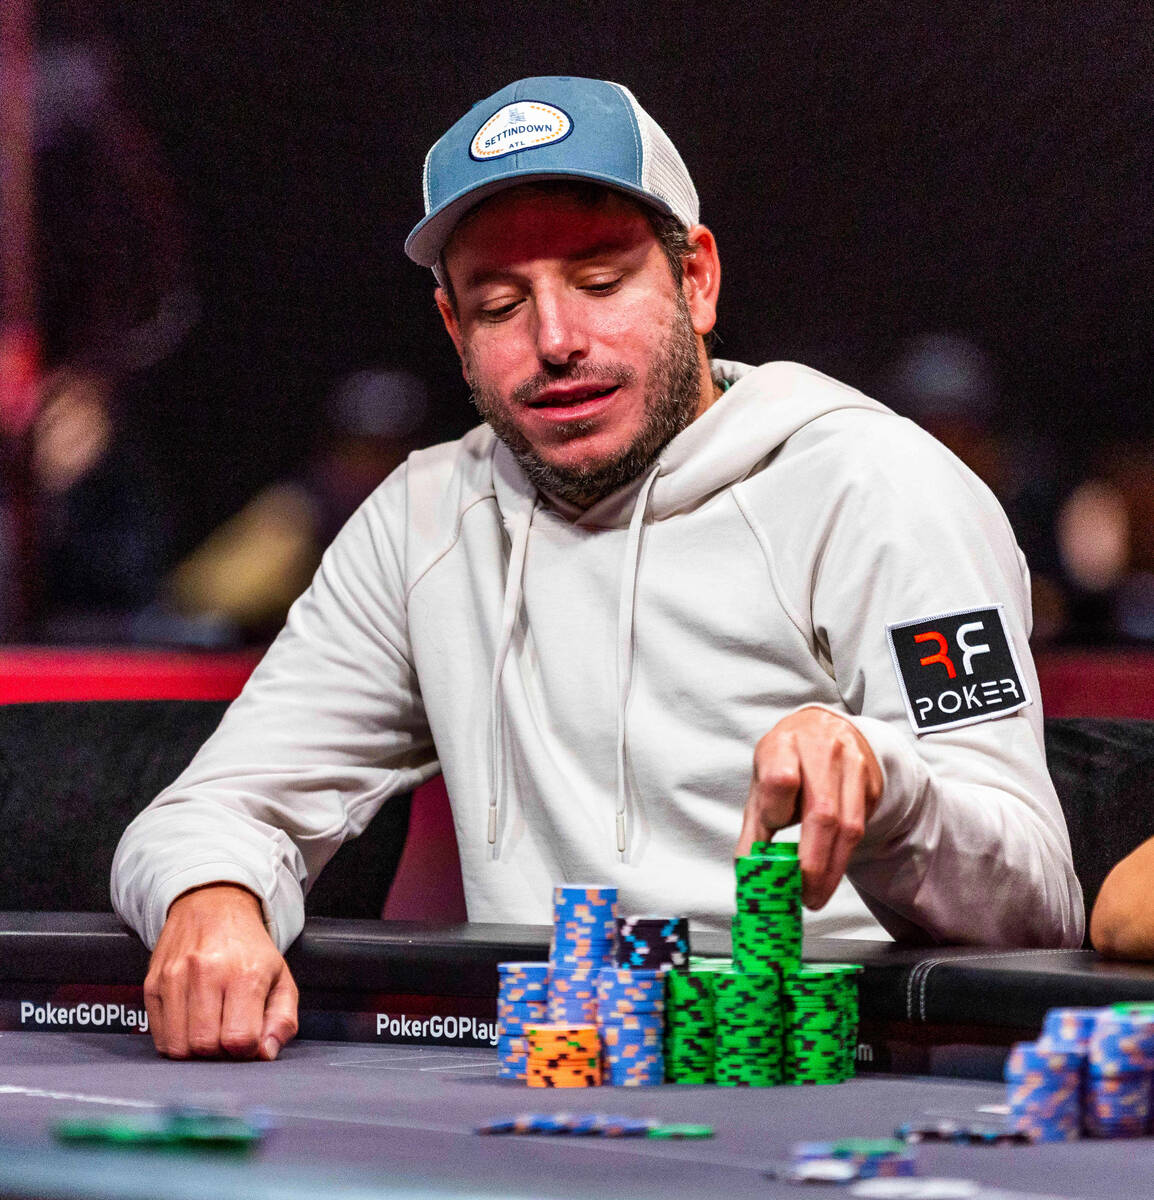 Daniel Weinman stacks more winning chips during Day 7 at the World Series of Poker Main Event i ...